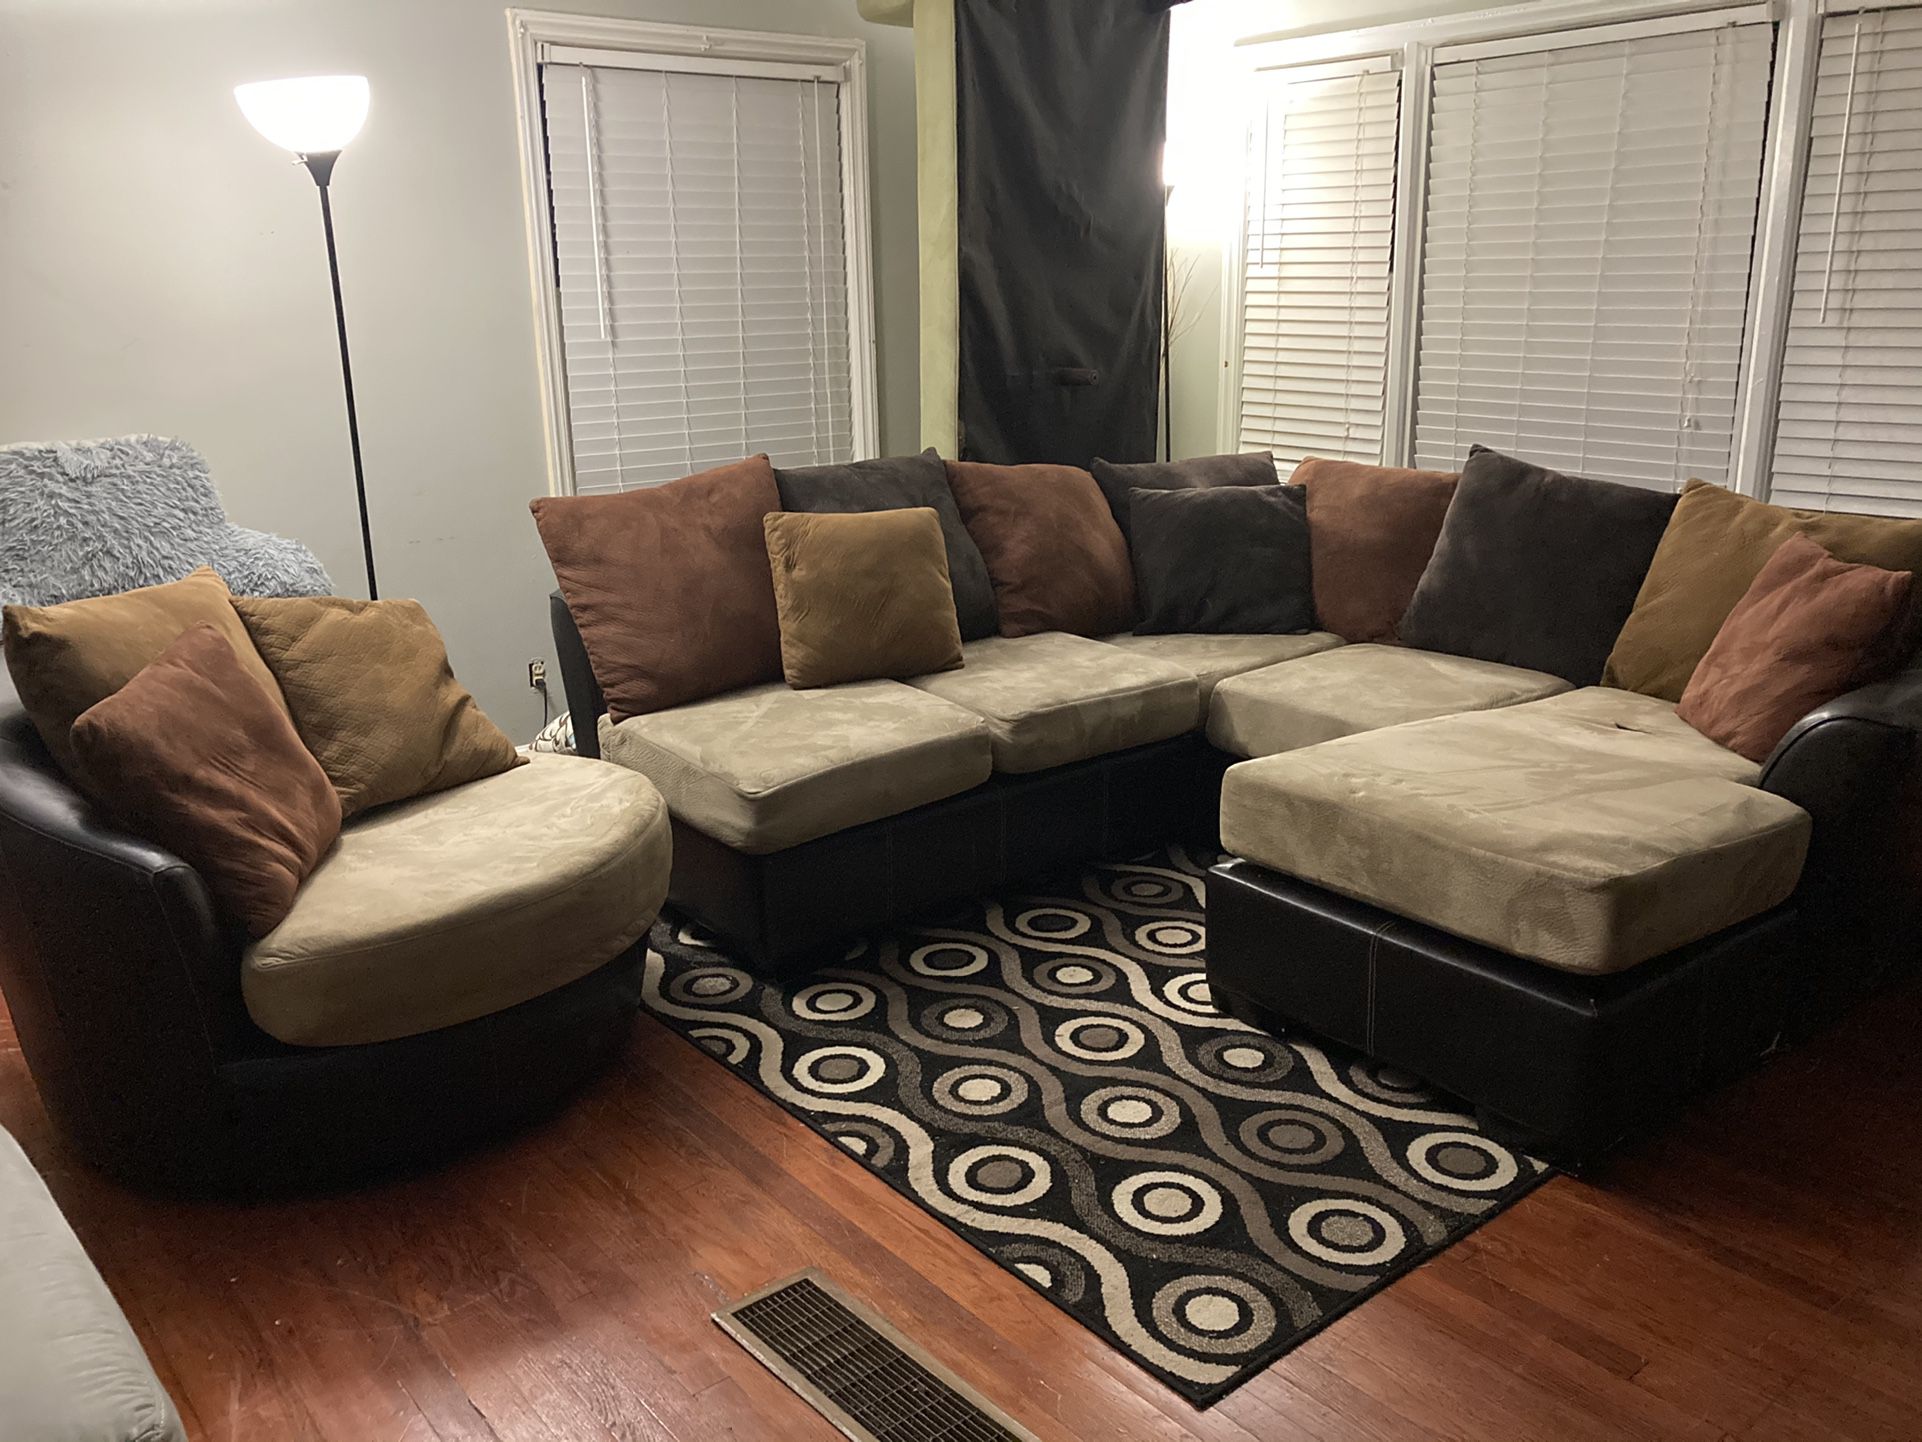 HAVERTYS PLUSH USED MOCHA SMALL 3PC SECTIONAL & REVOLVING CHAIR $399 OBO...ALL OFFERS WELCOME!!